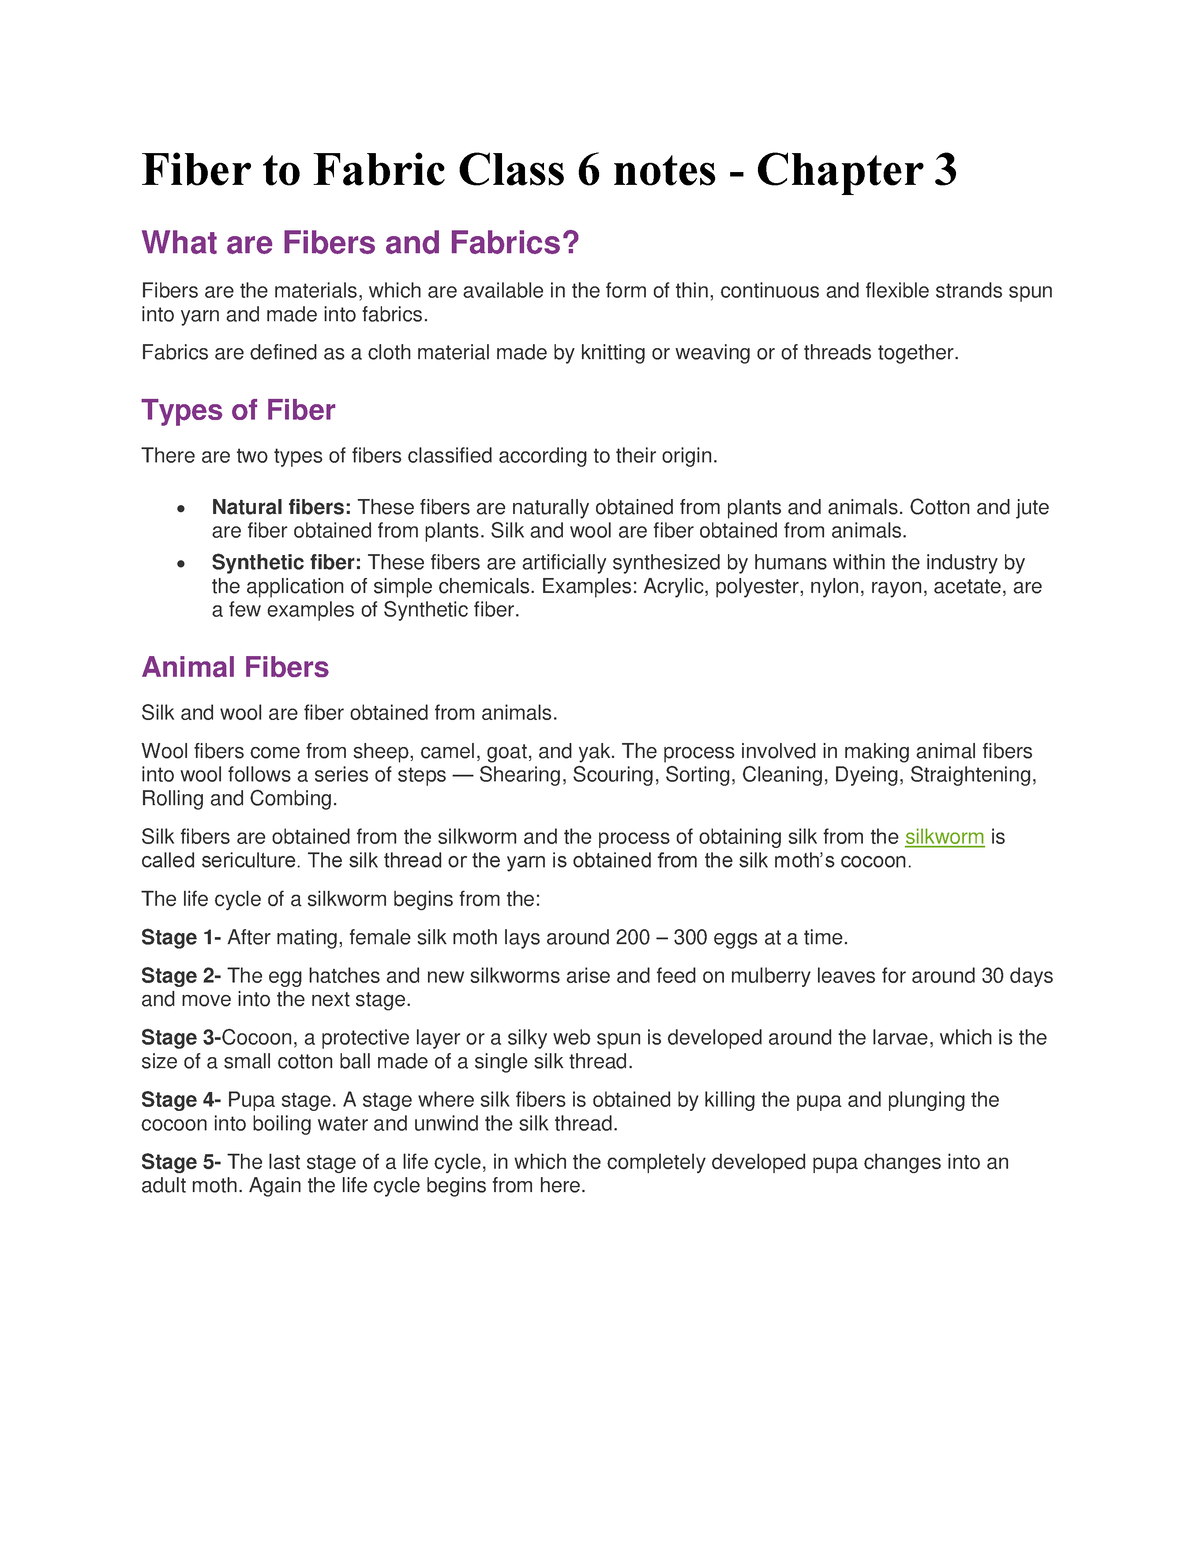 Fiber to Fabric Class 6 notes - Fiber to Fabric Class 6 notes - Chapter 3  What are Fibers and - Studocu